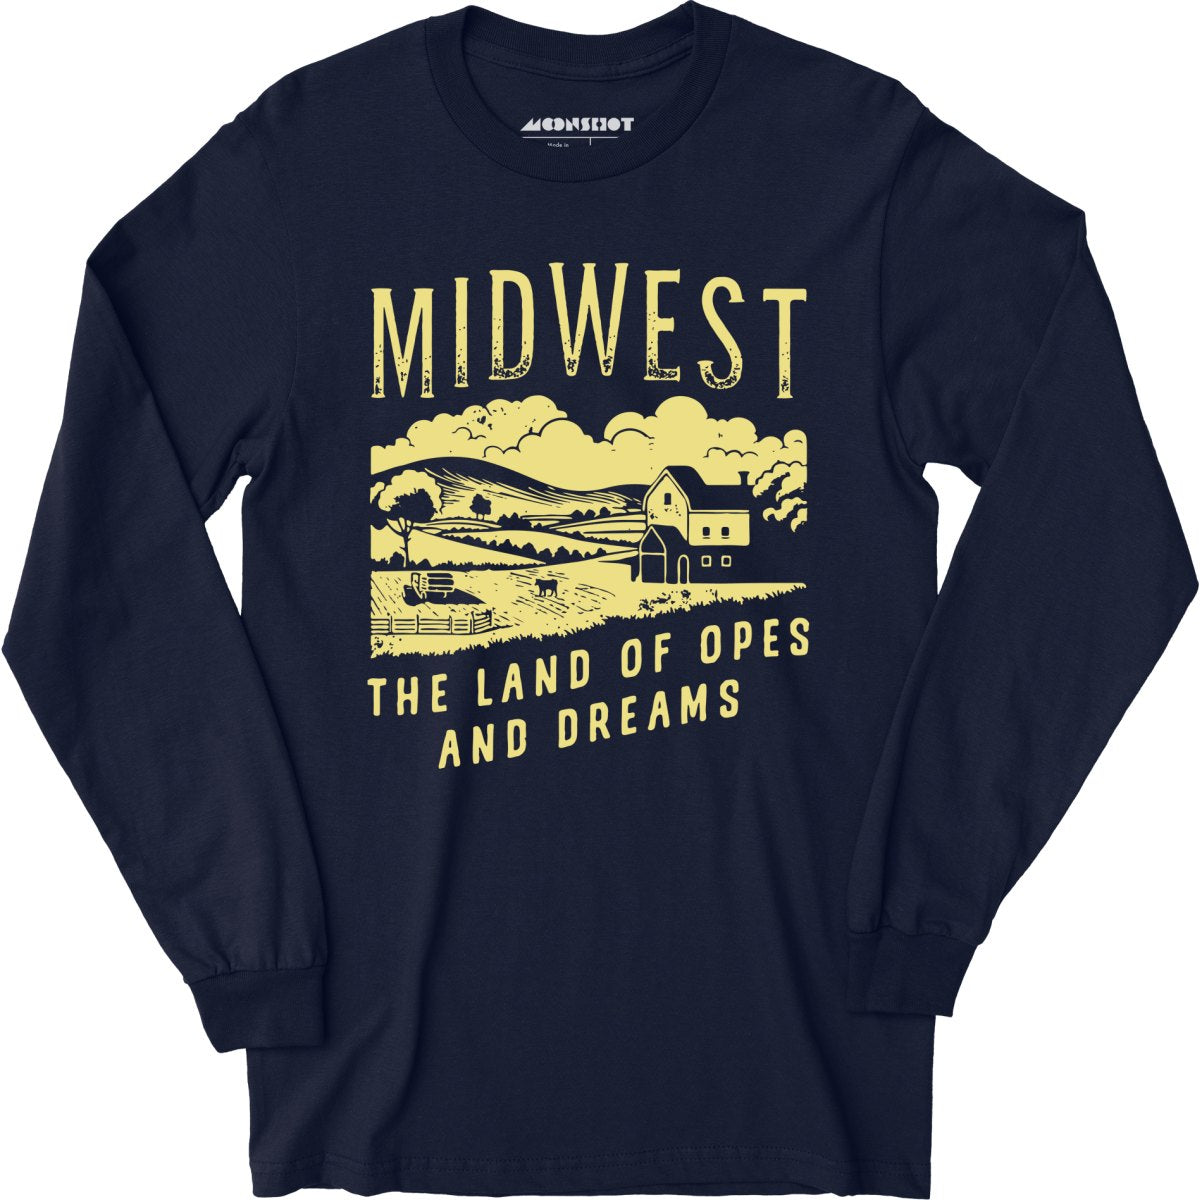 Midwest The Land of Opes and Dreams - Long Sleeve T-Shirt